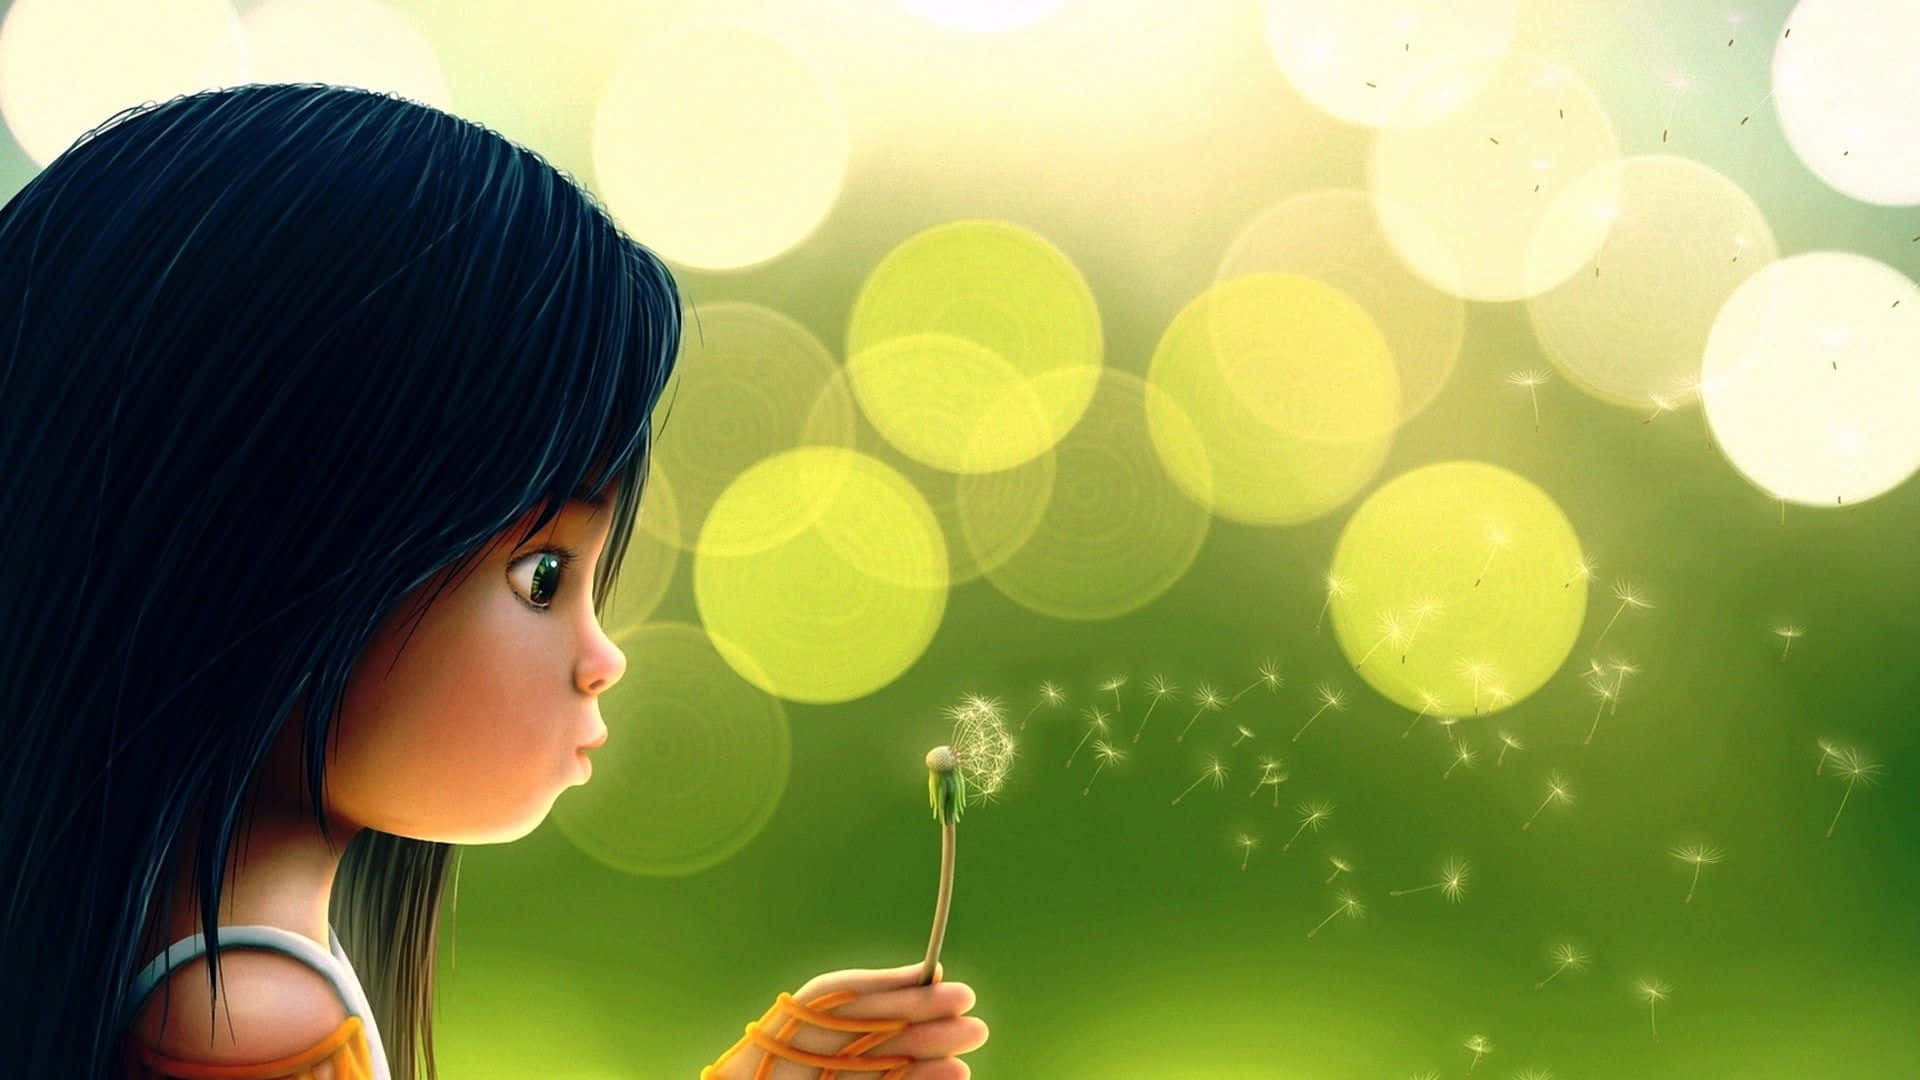 A Girl Blowing A Dandelion In The Grass Wallpaper